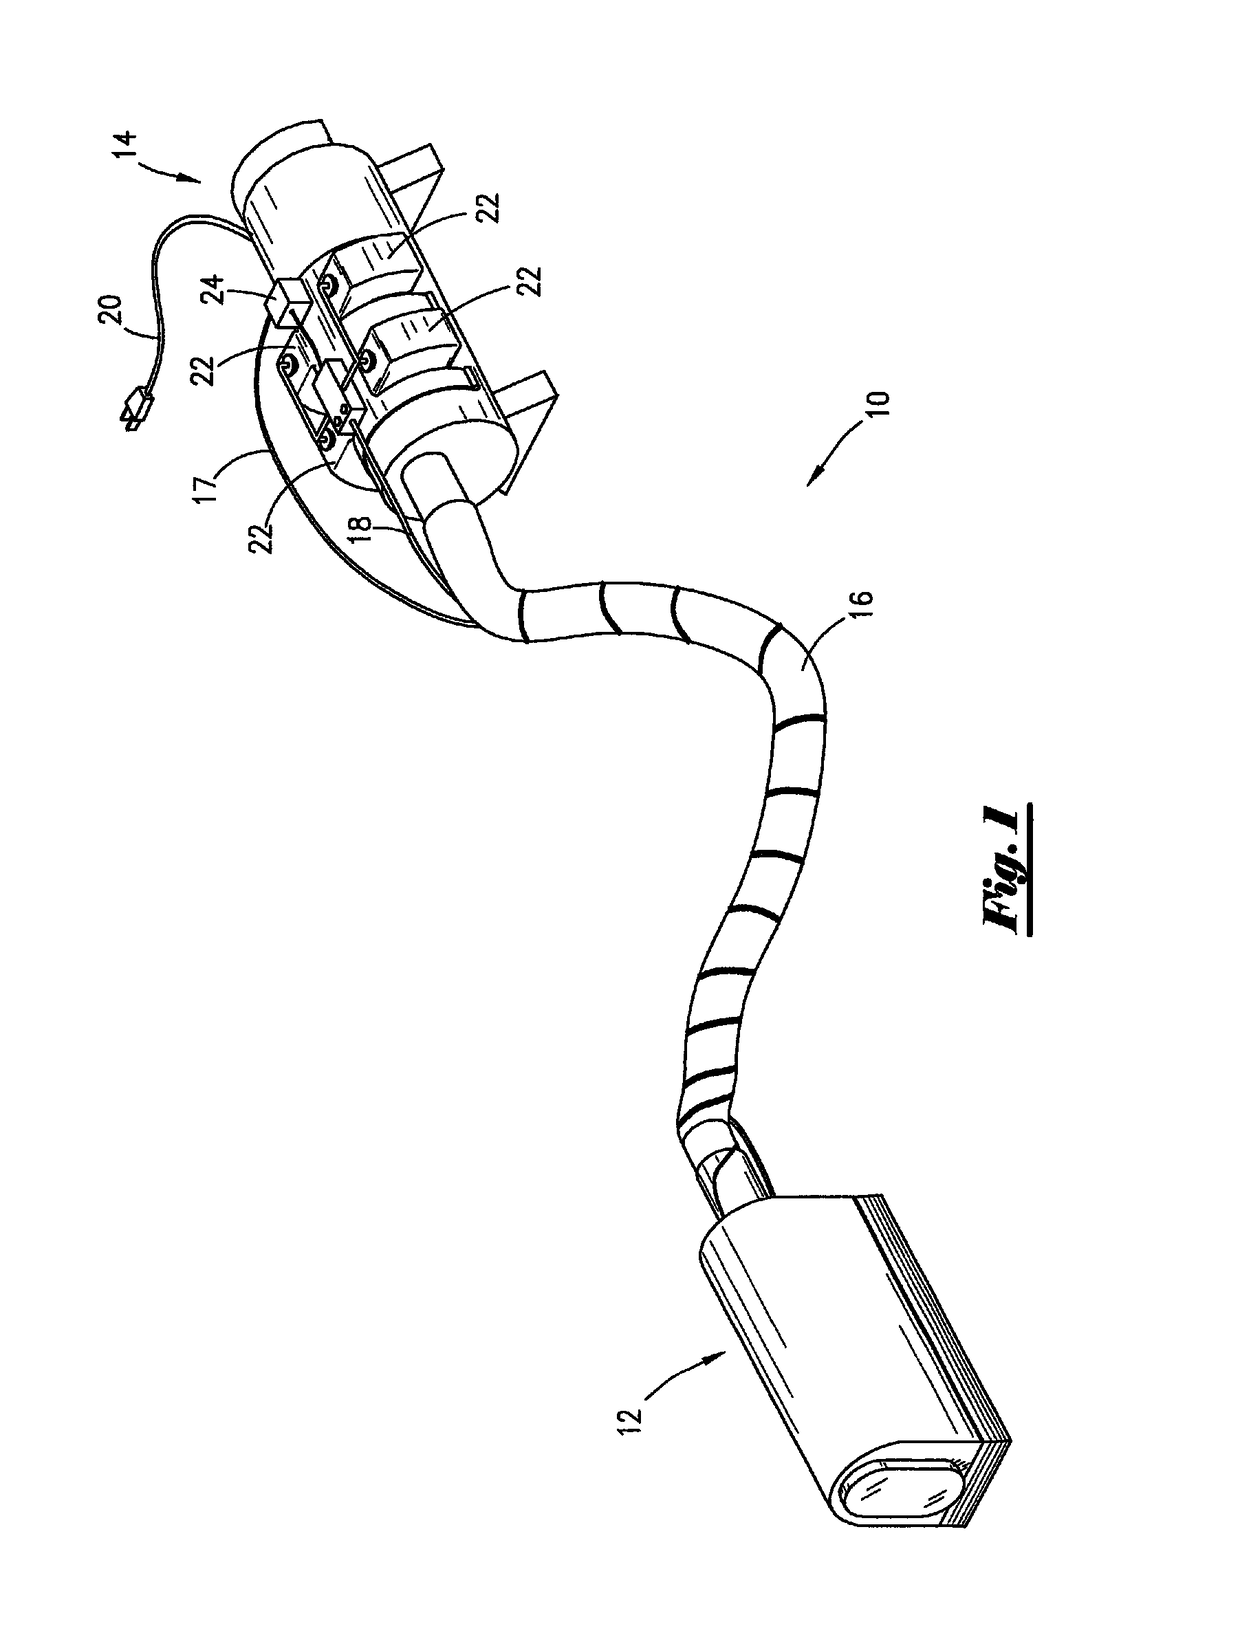 Method and apparatus for cleaning air conditioner evaporator coils